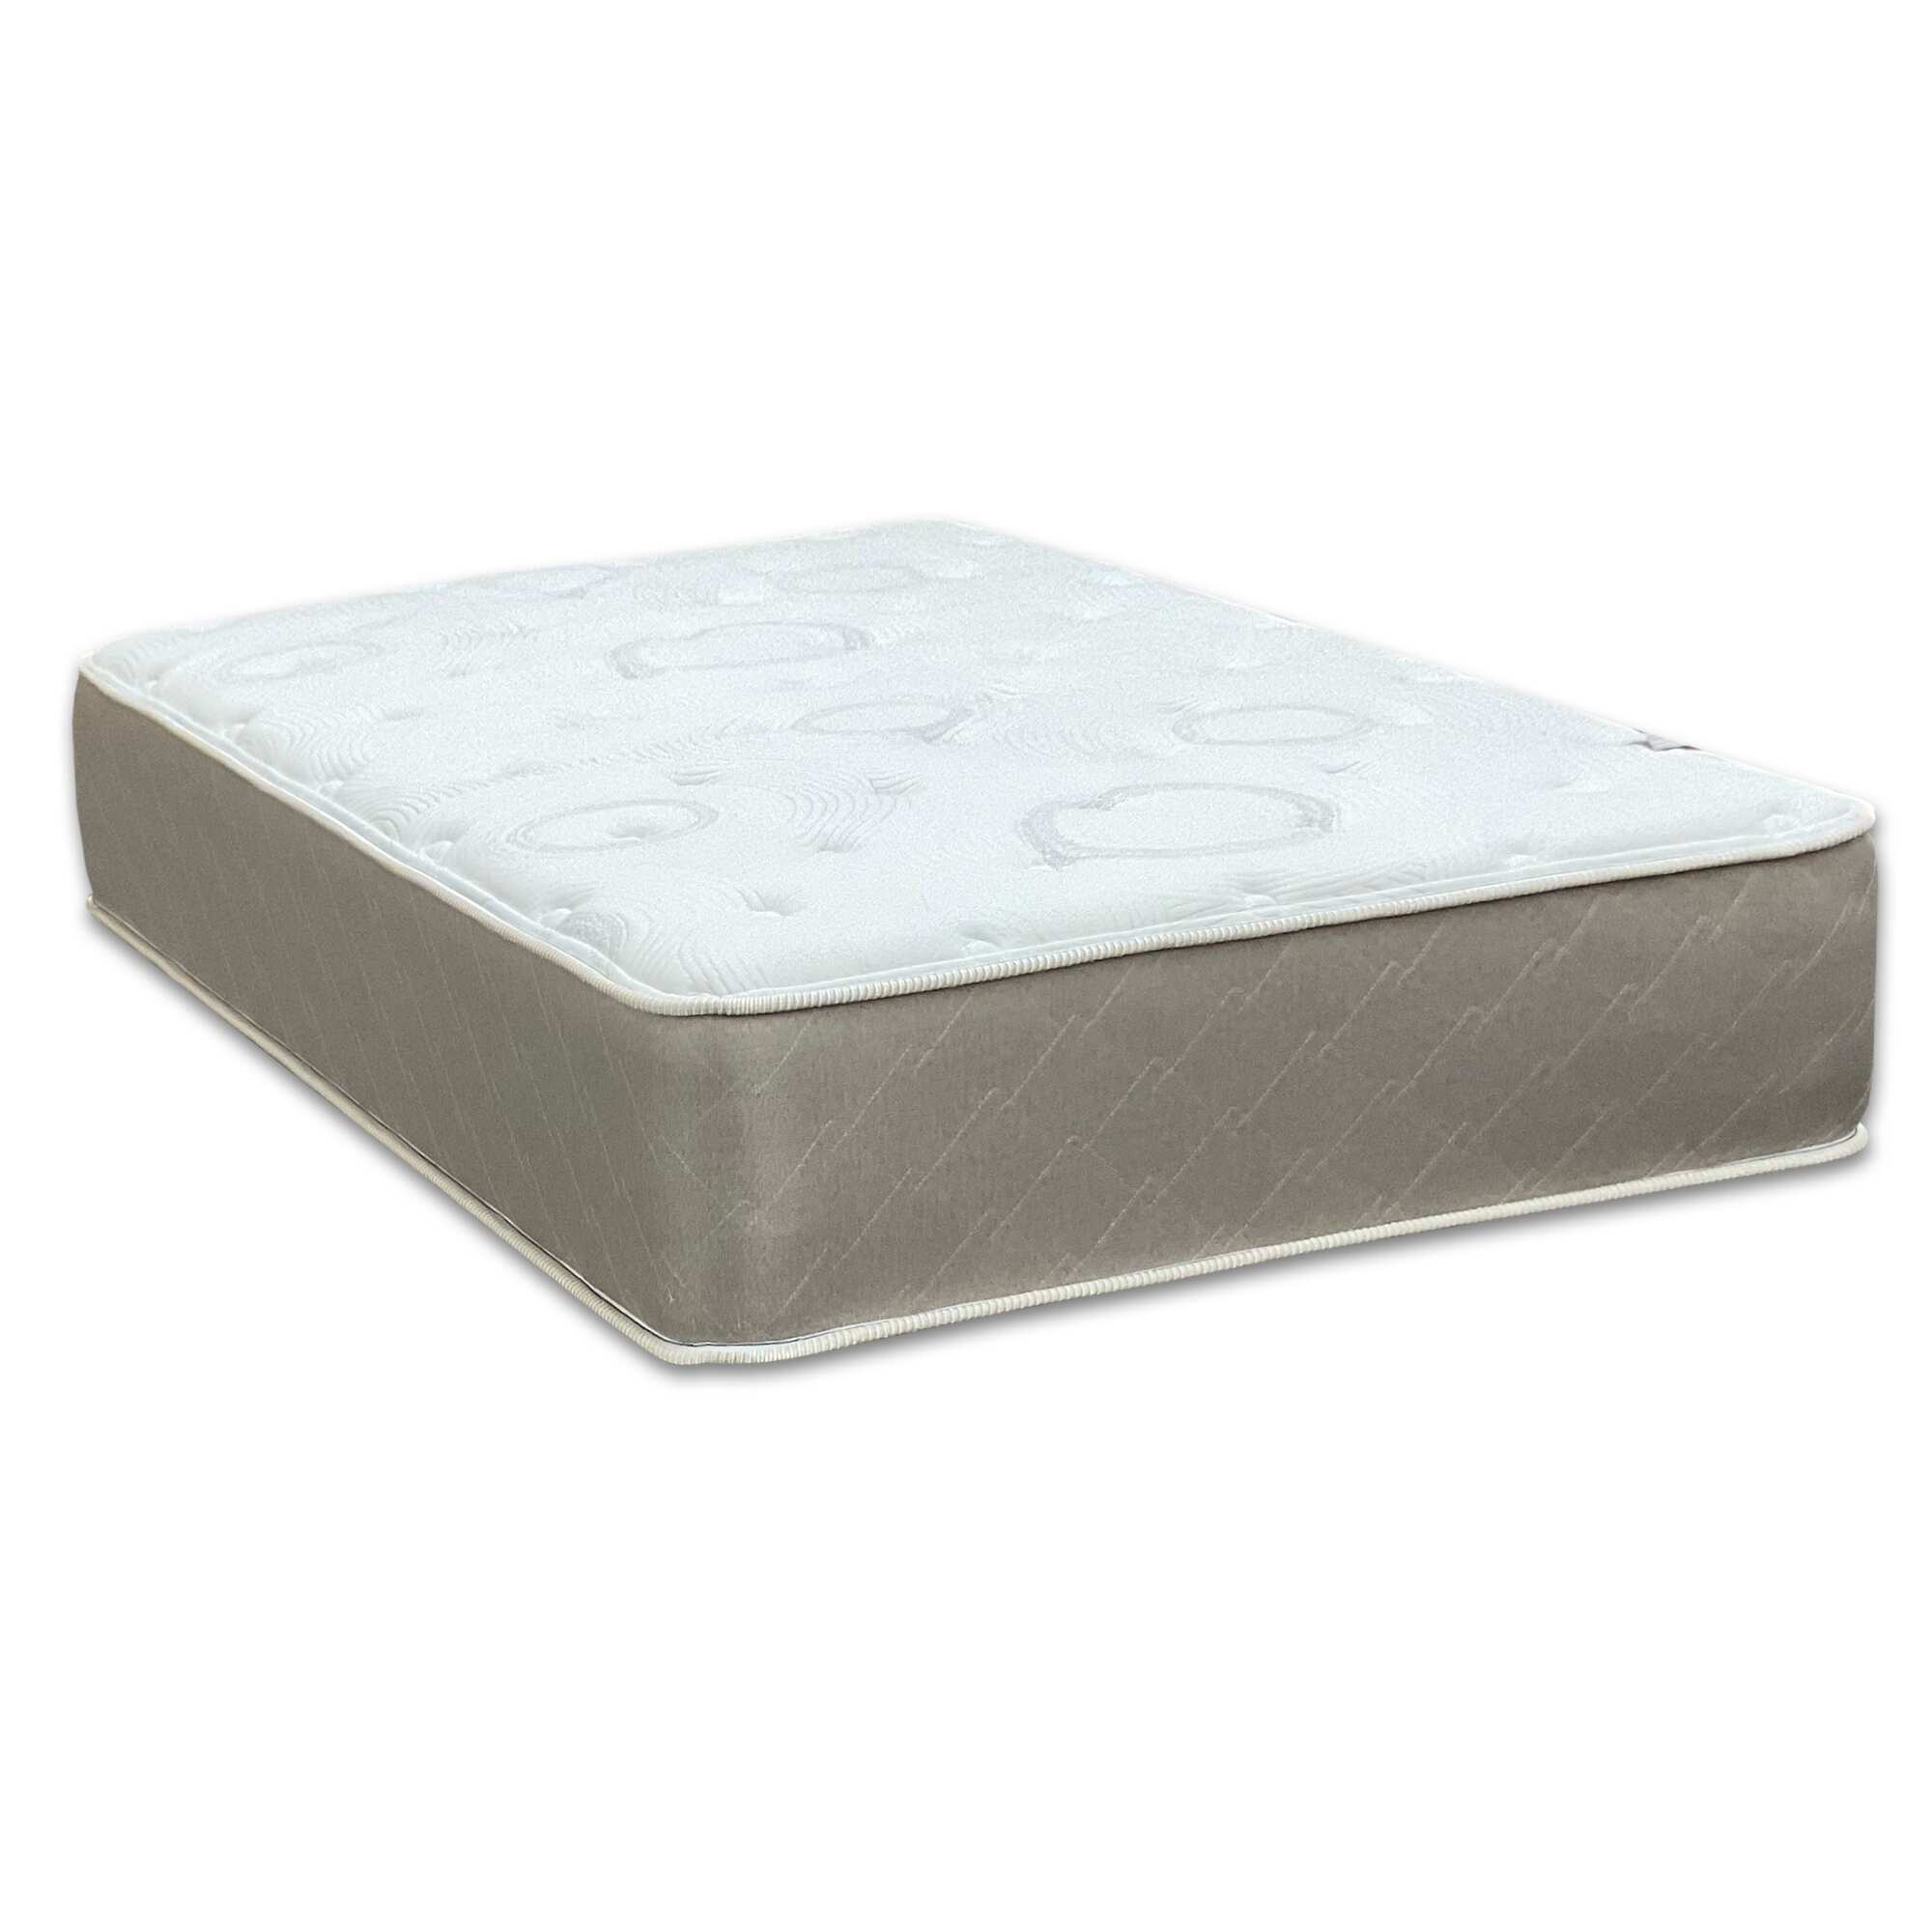 13-Inch Firm Heavier Pocket Coil Spring Hybrid Mattress, Motion Isolation with Durable Support, Bed in a Box